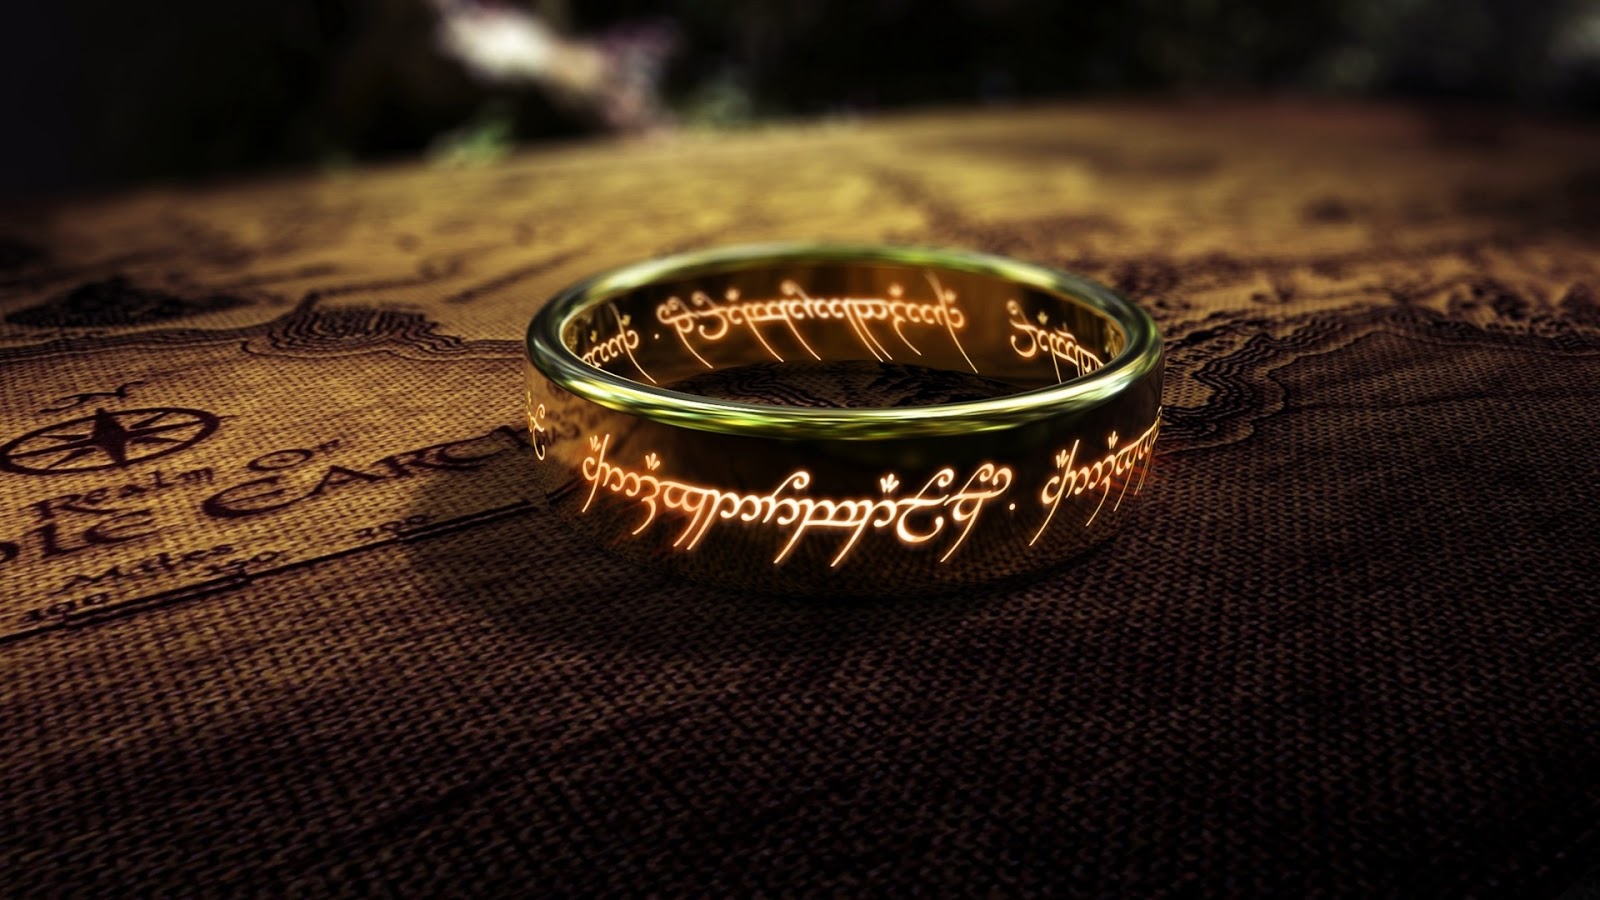 Download The Lord Of The Rings Wallpaper For Desktop and Mac 1600x900